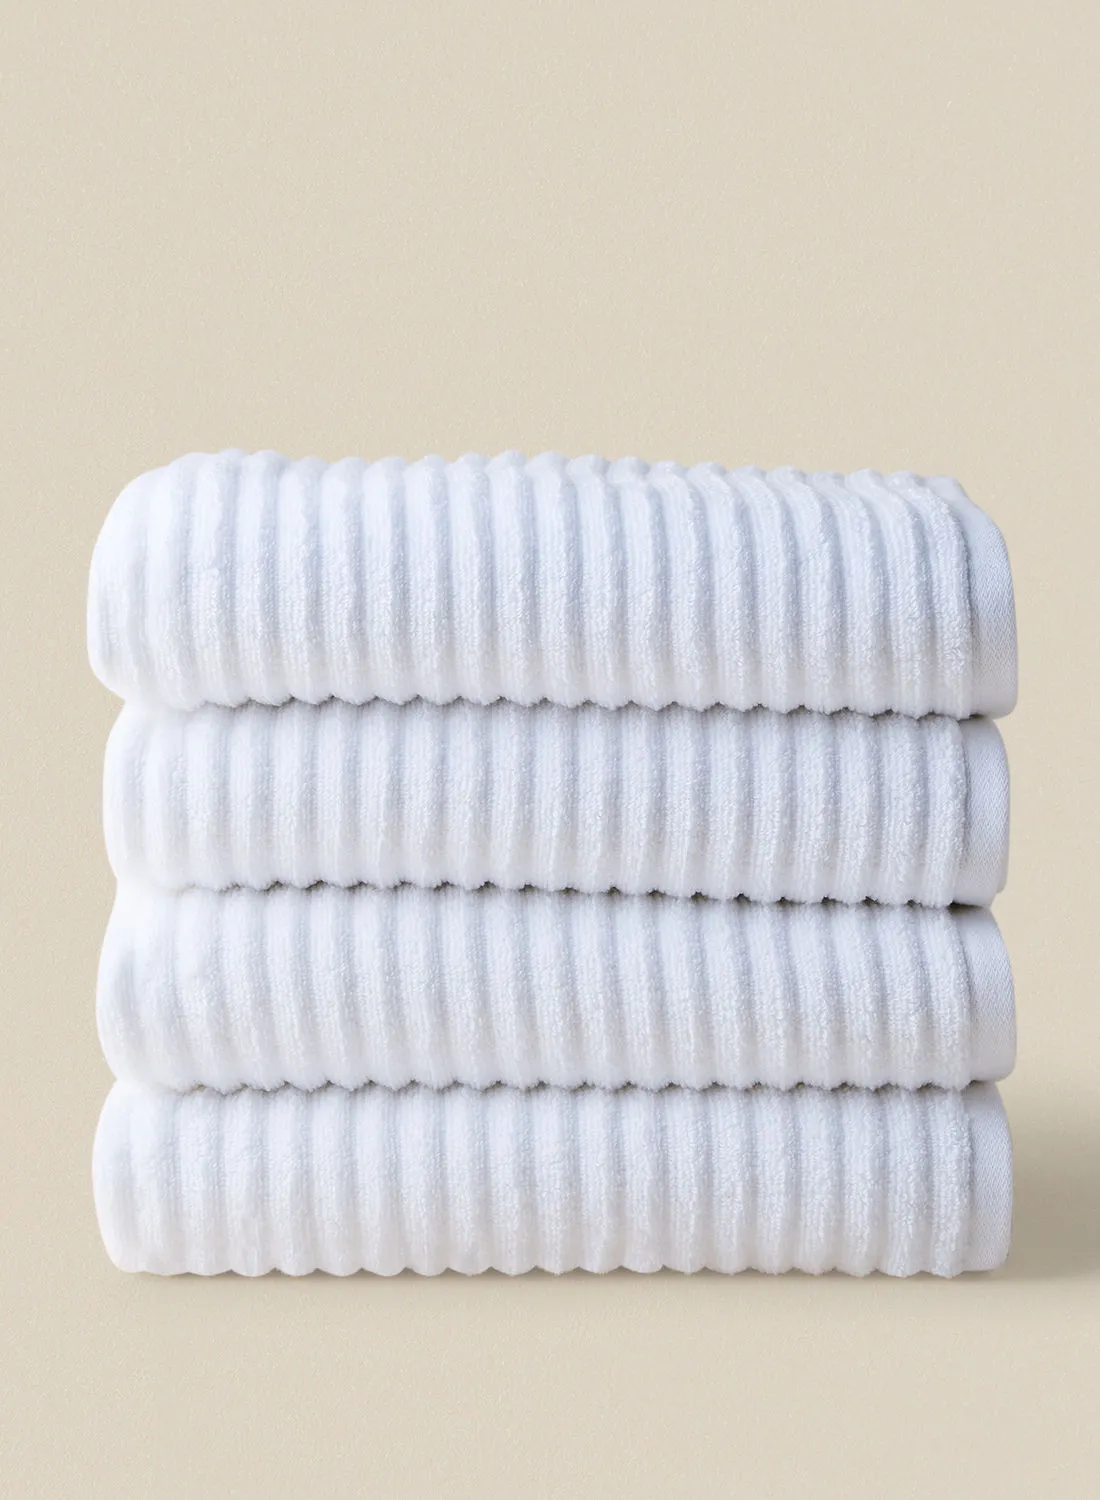 noon east 4 Piece Bathroom Towel Set - 450 GSM 100% Cotton Ribbed - 4 Bath Towel - White Color - Highly Absorbent - Fast Dry